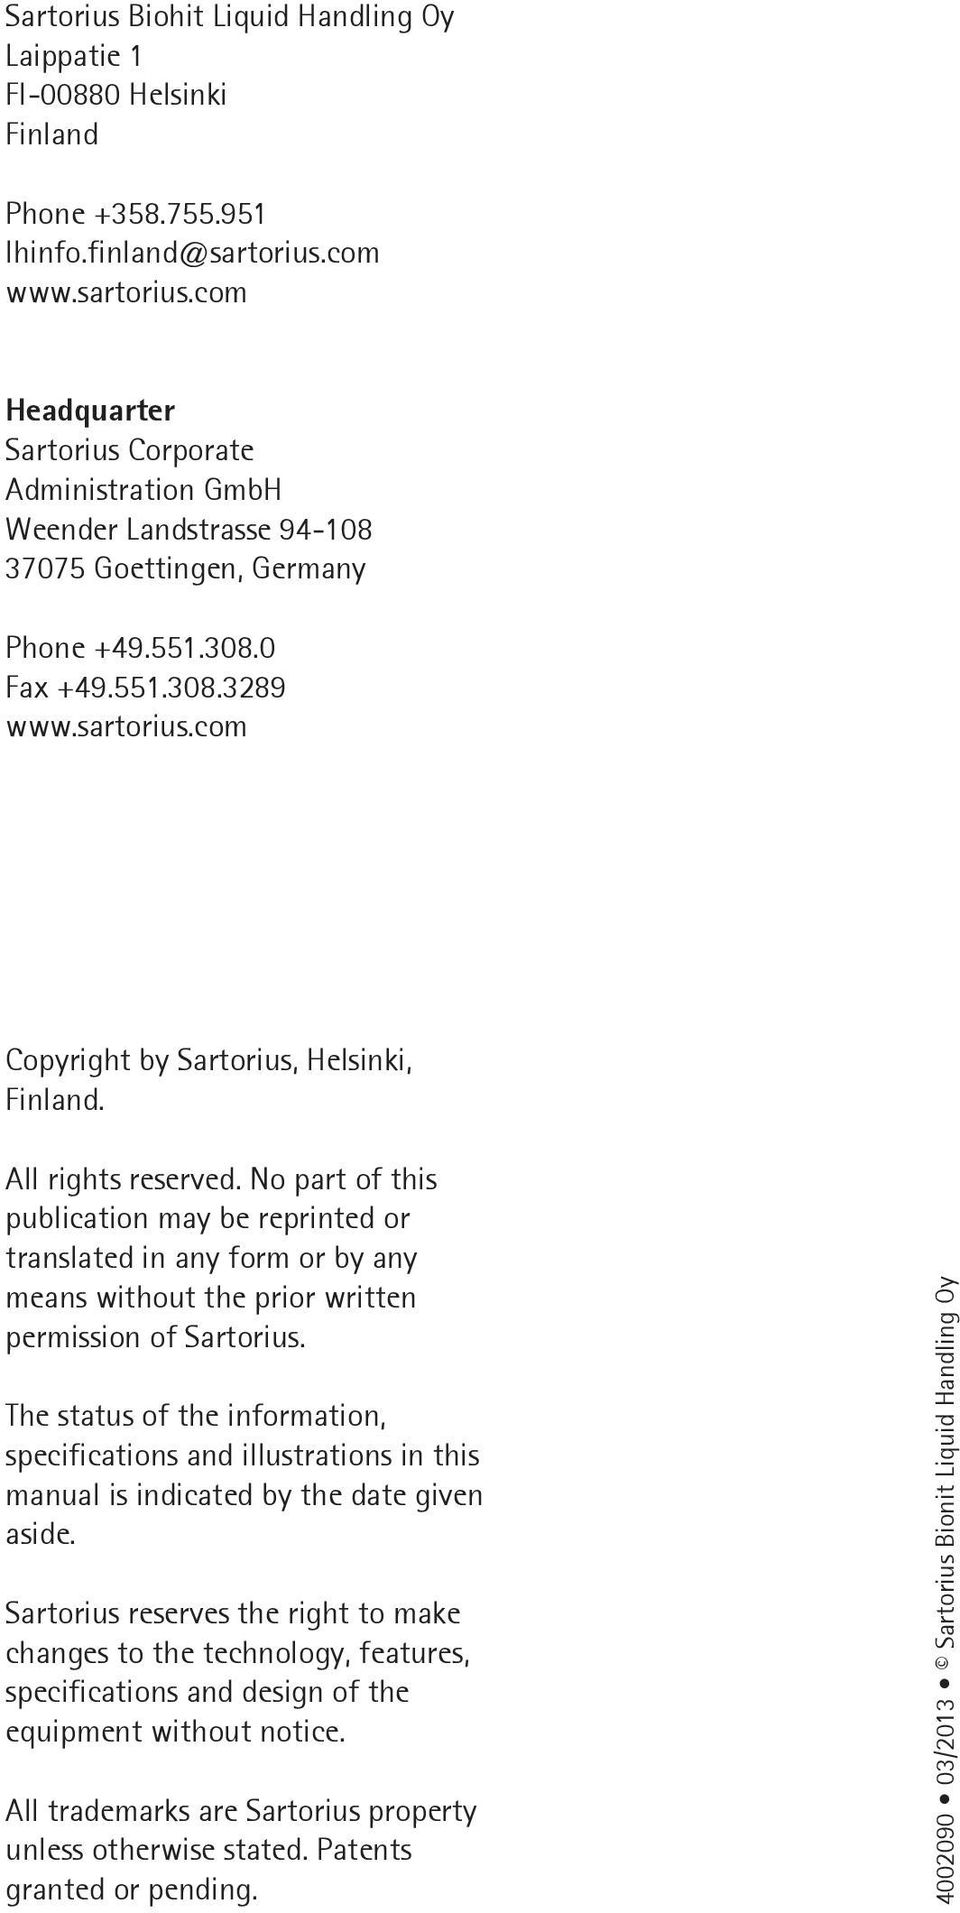 All rights reserved. No part of this publication may be reprinted or translated in any form or by any means without the prior written permission of Sartorius.